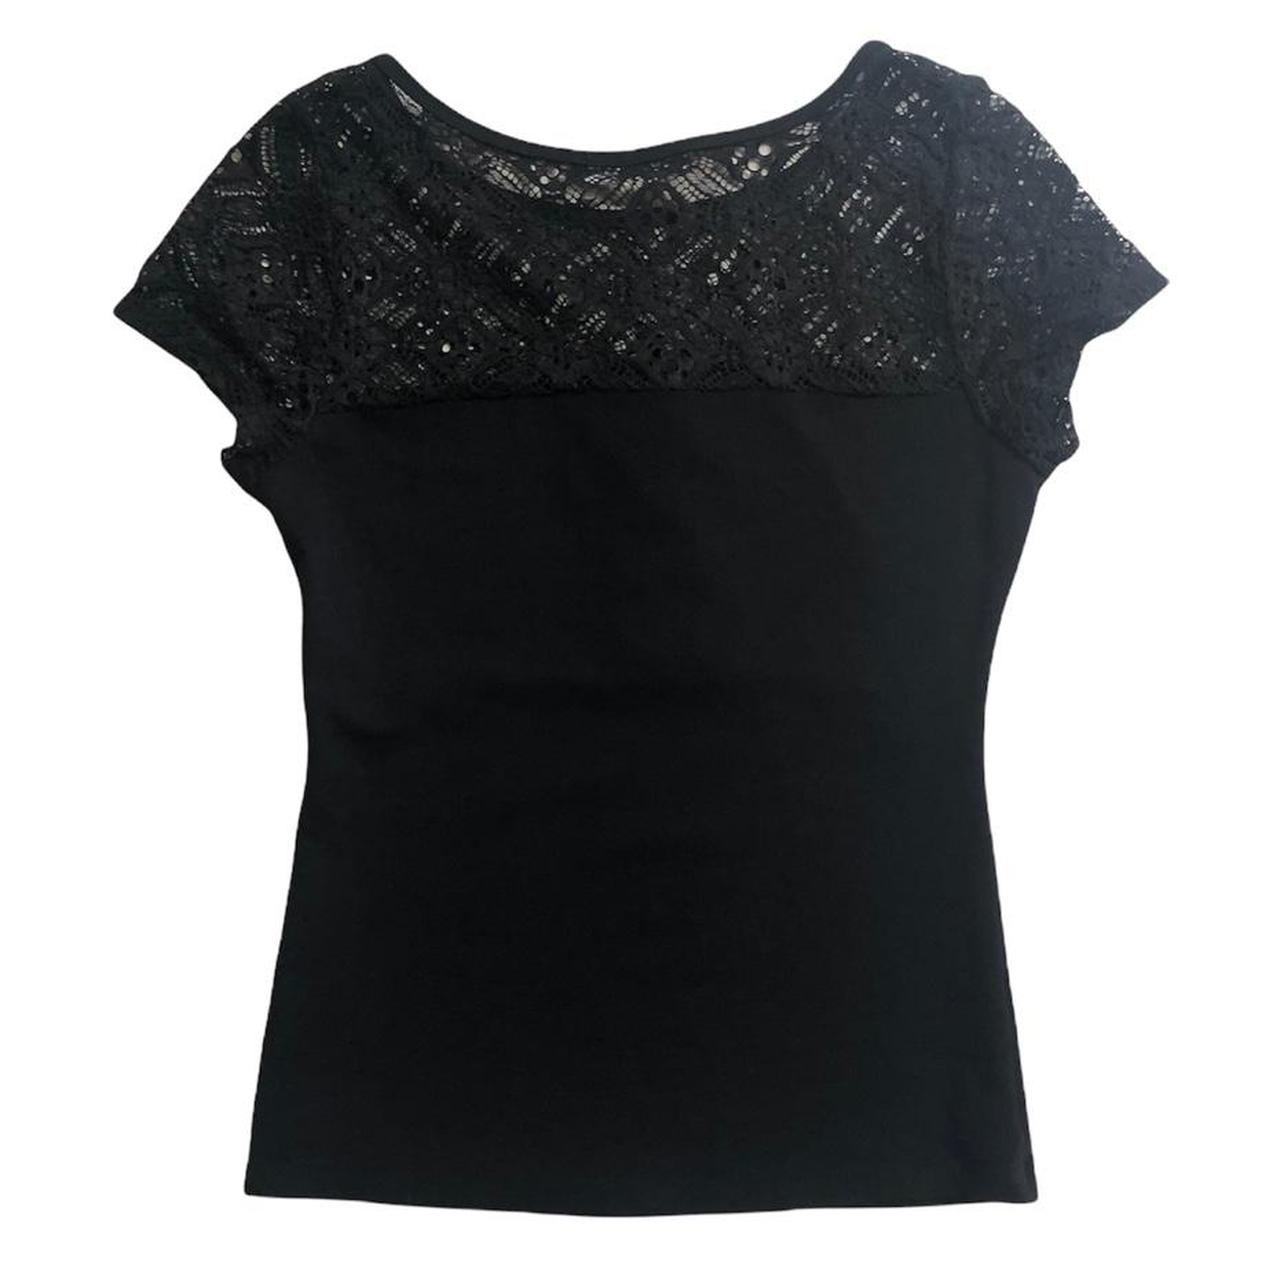 Product Image 2 - Goth black lace top <3
•
Love